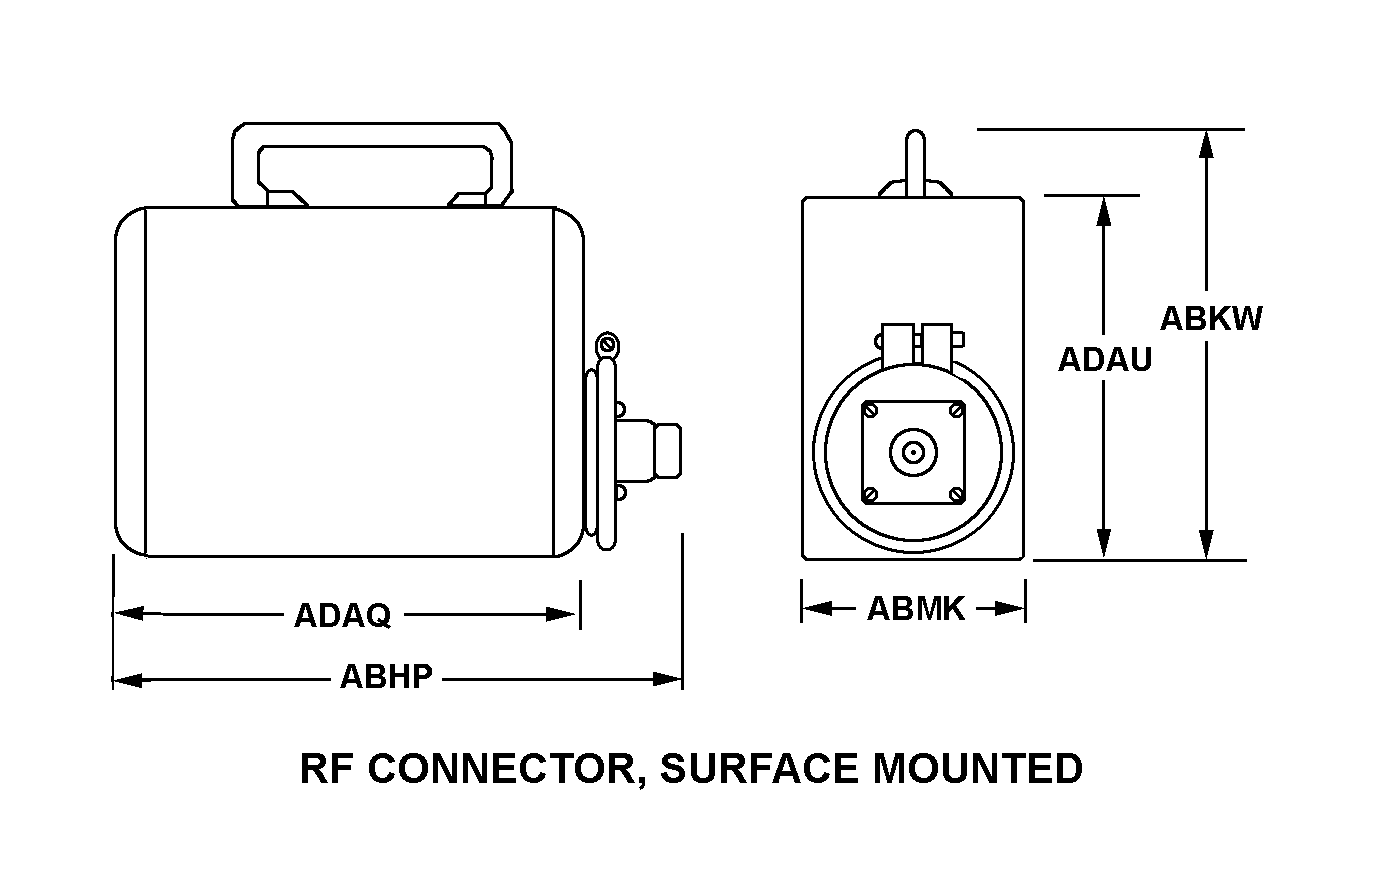 RF CONNECTOR, SURFACE MOUNTED style nsn 5985-01-192-4439